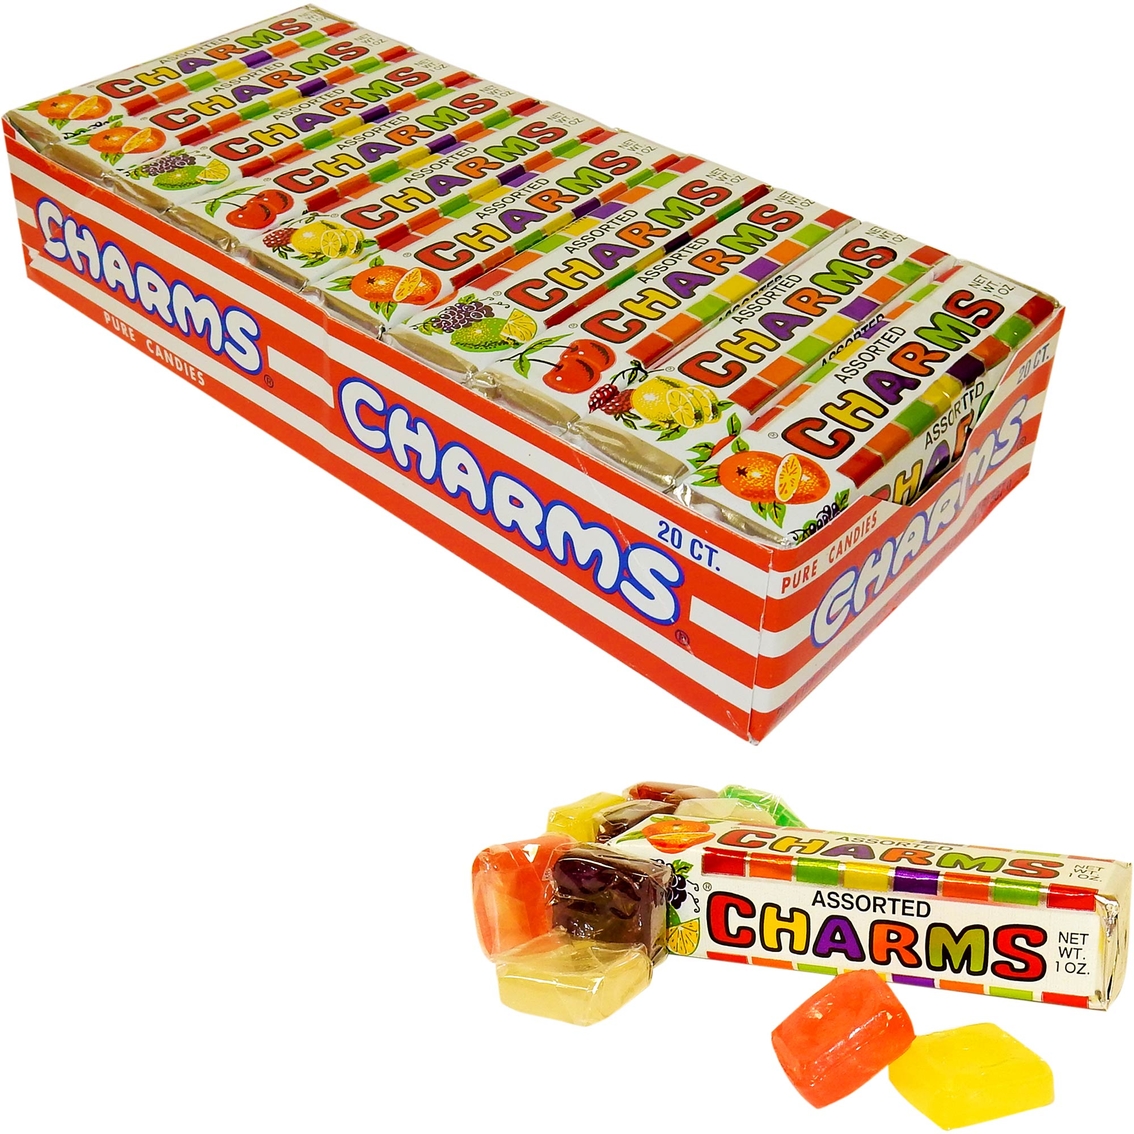 Charms Assorted Squares 20 Pk., Candy & Chocolate